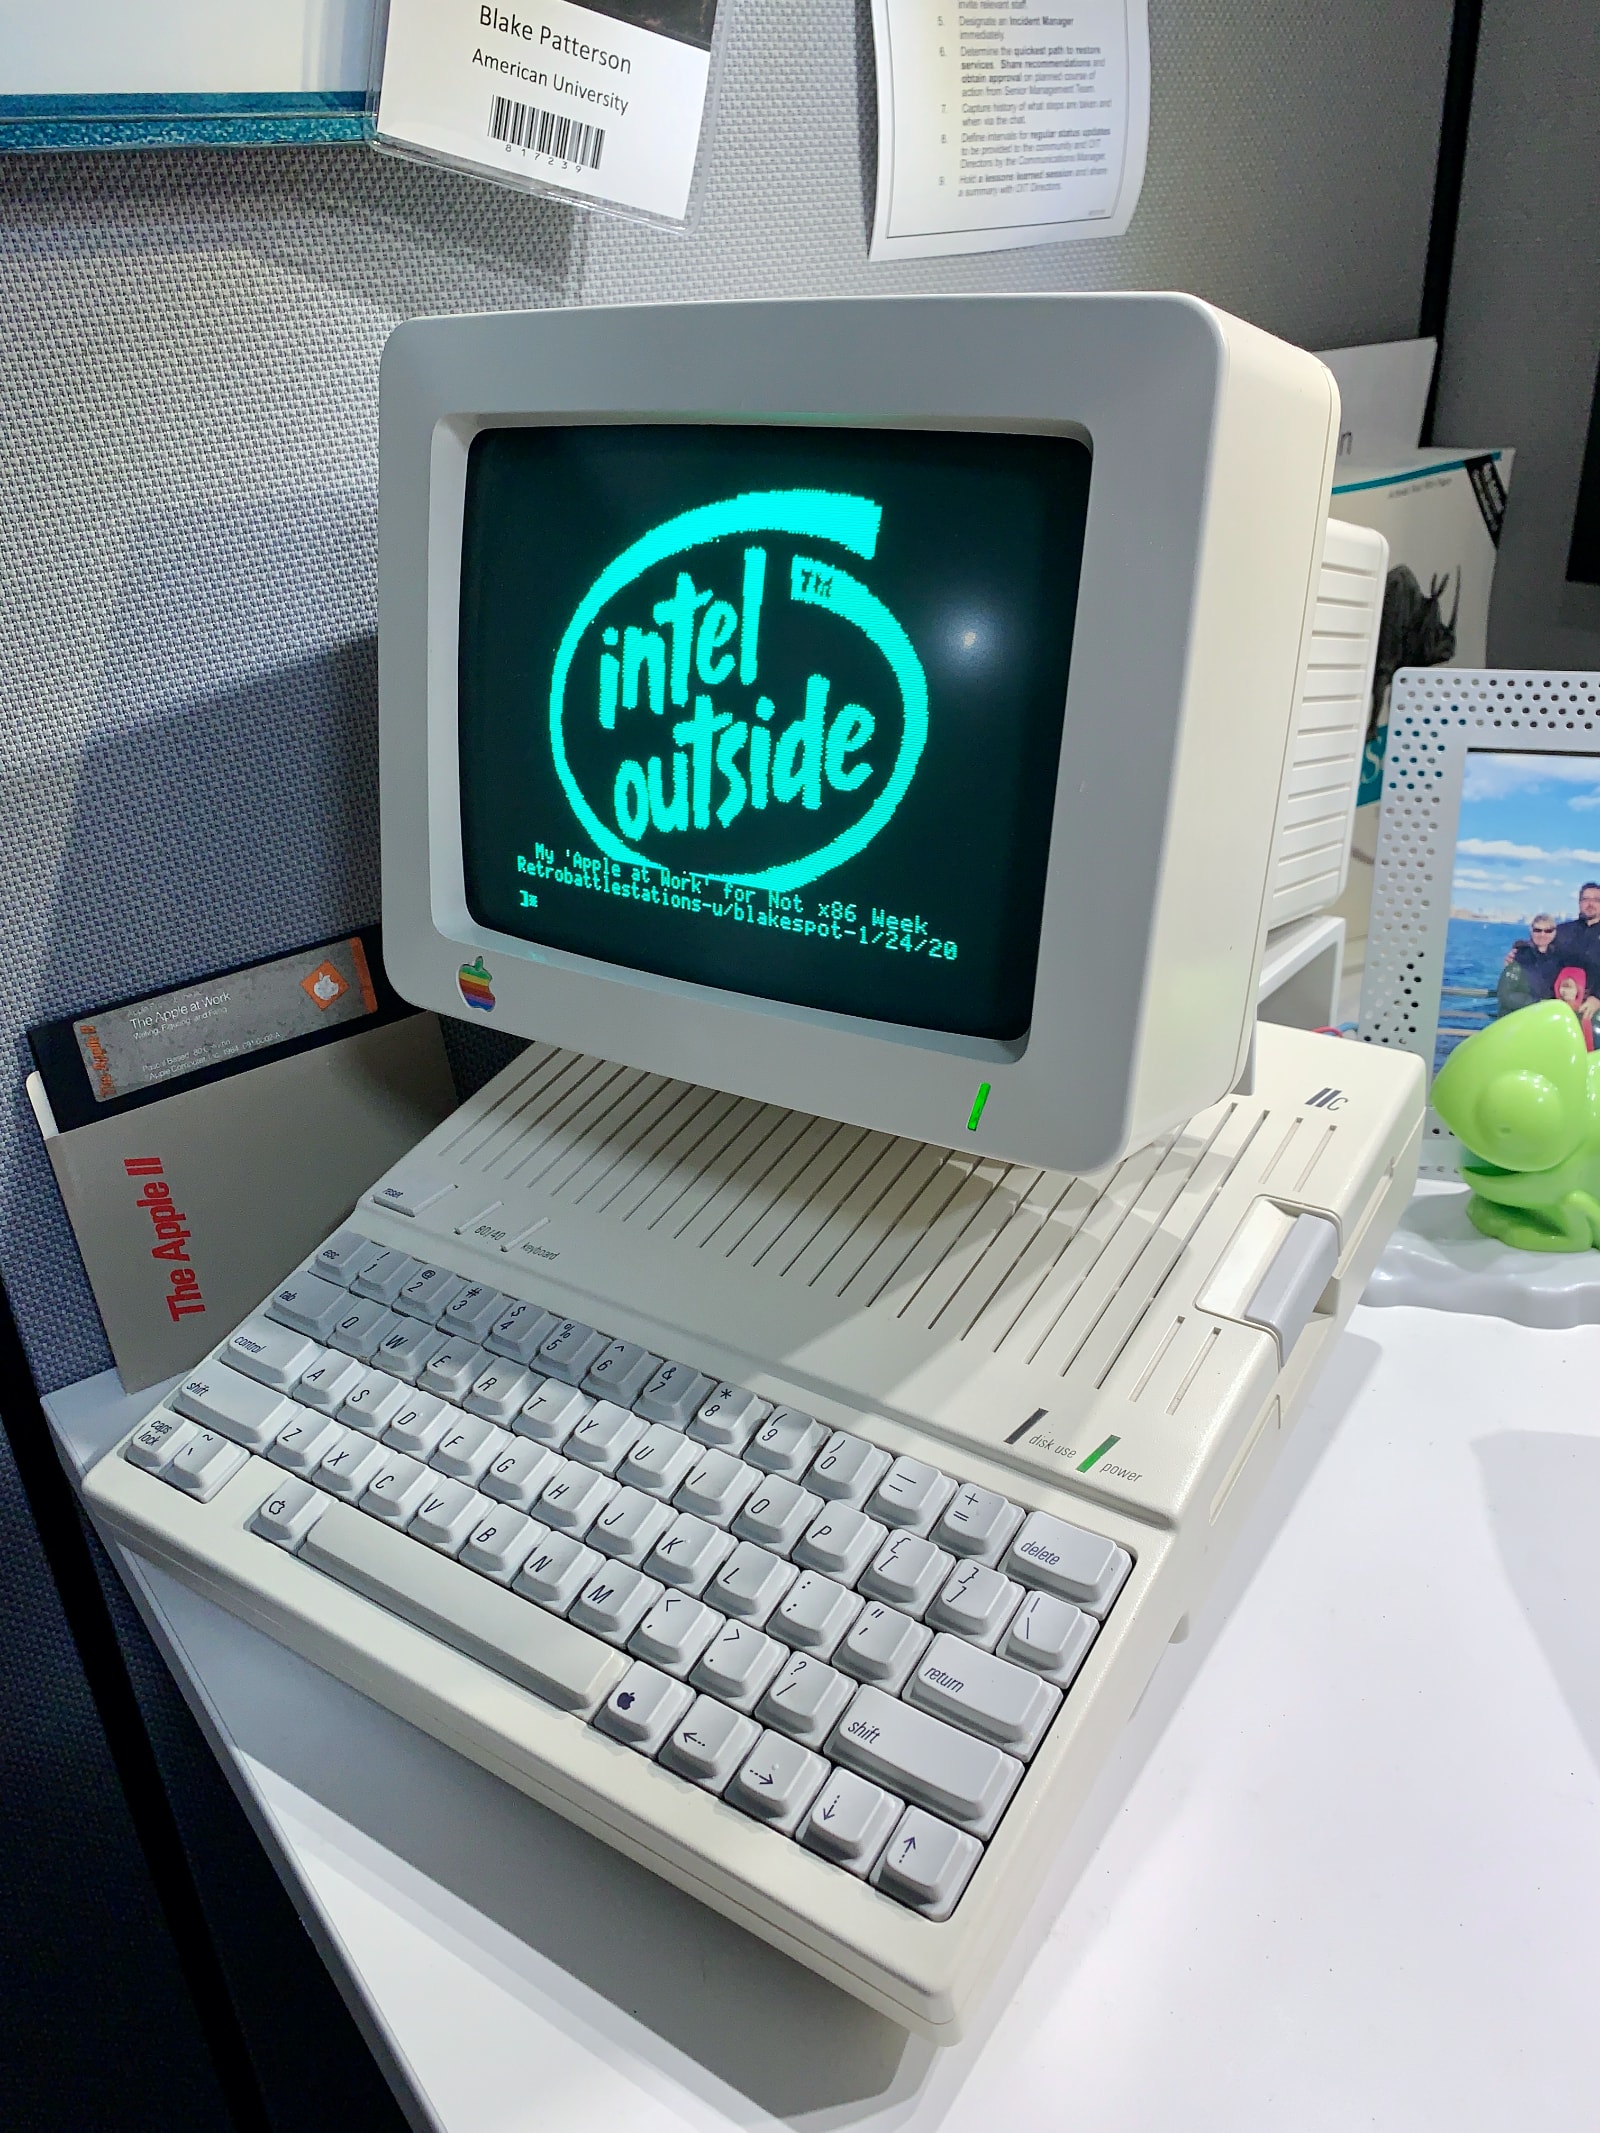 Apple 2c with "Intel Outside" logo shown on the screen